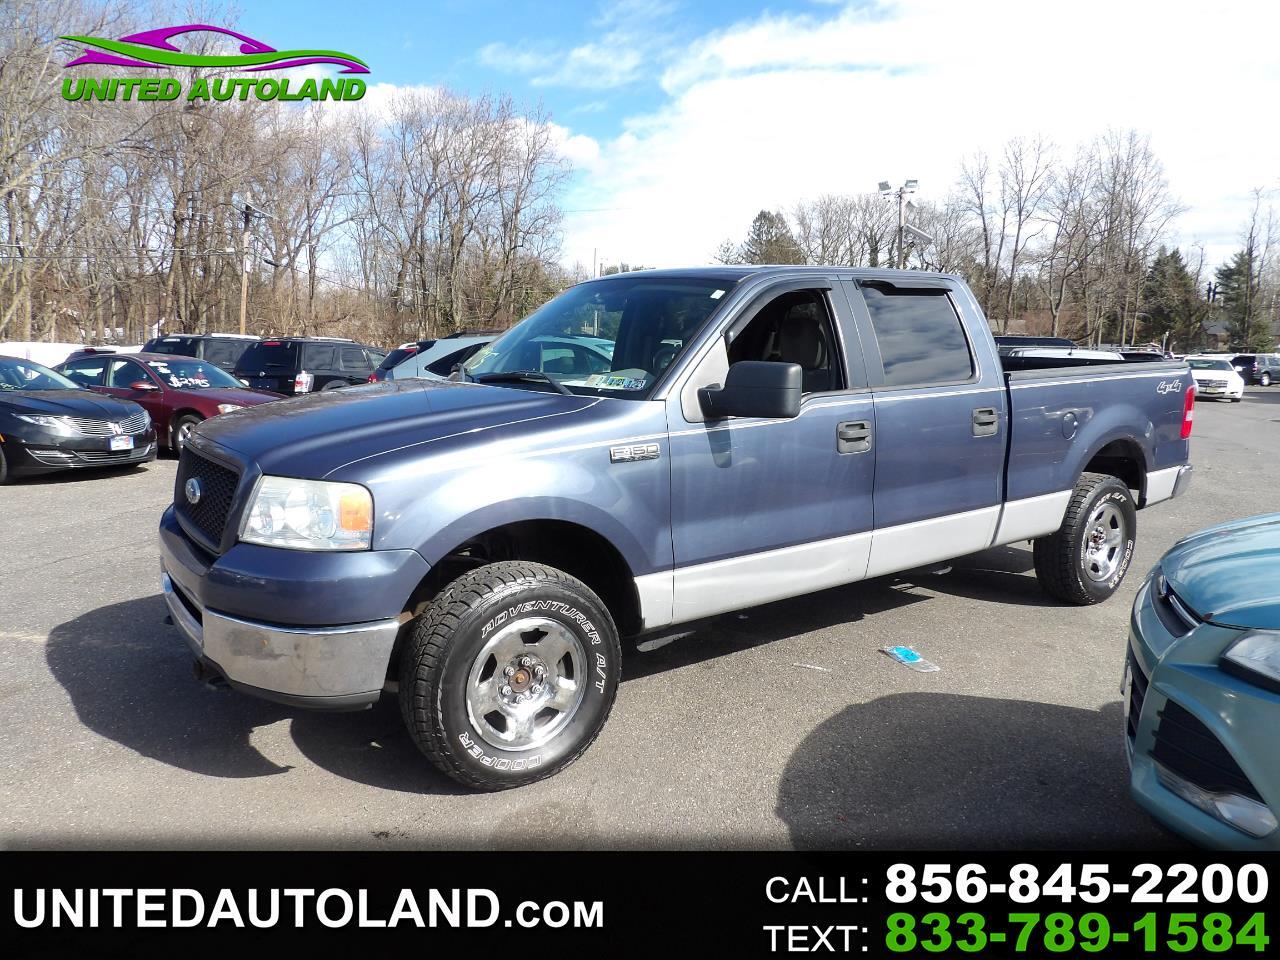 2006 Ford F-150 SuperCrew 139" King Ranch 4WD